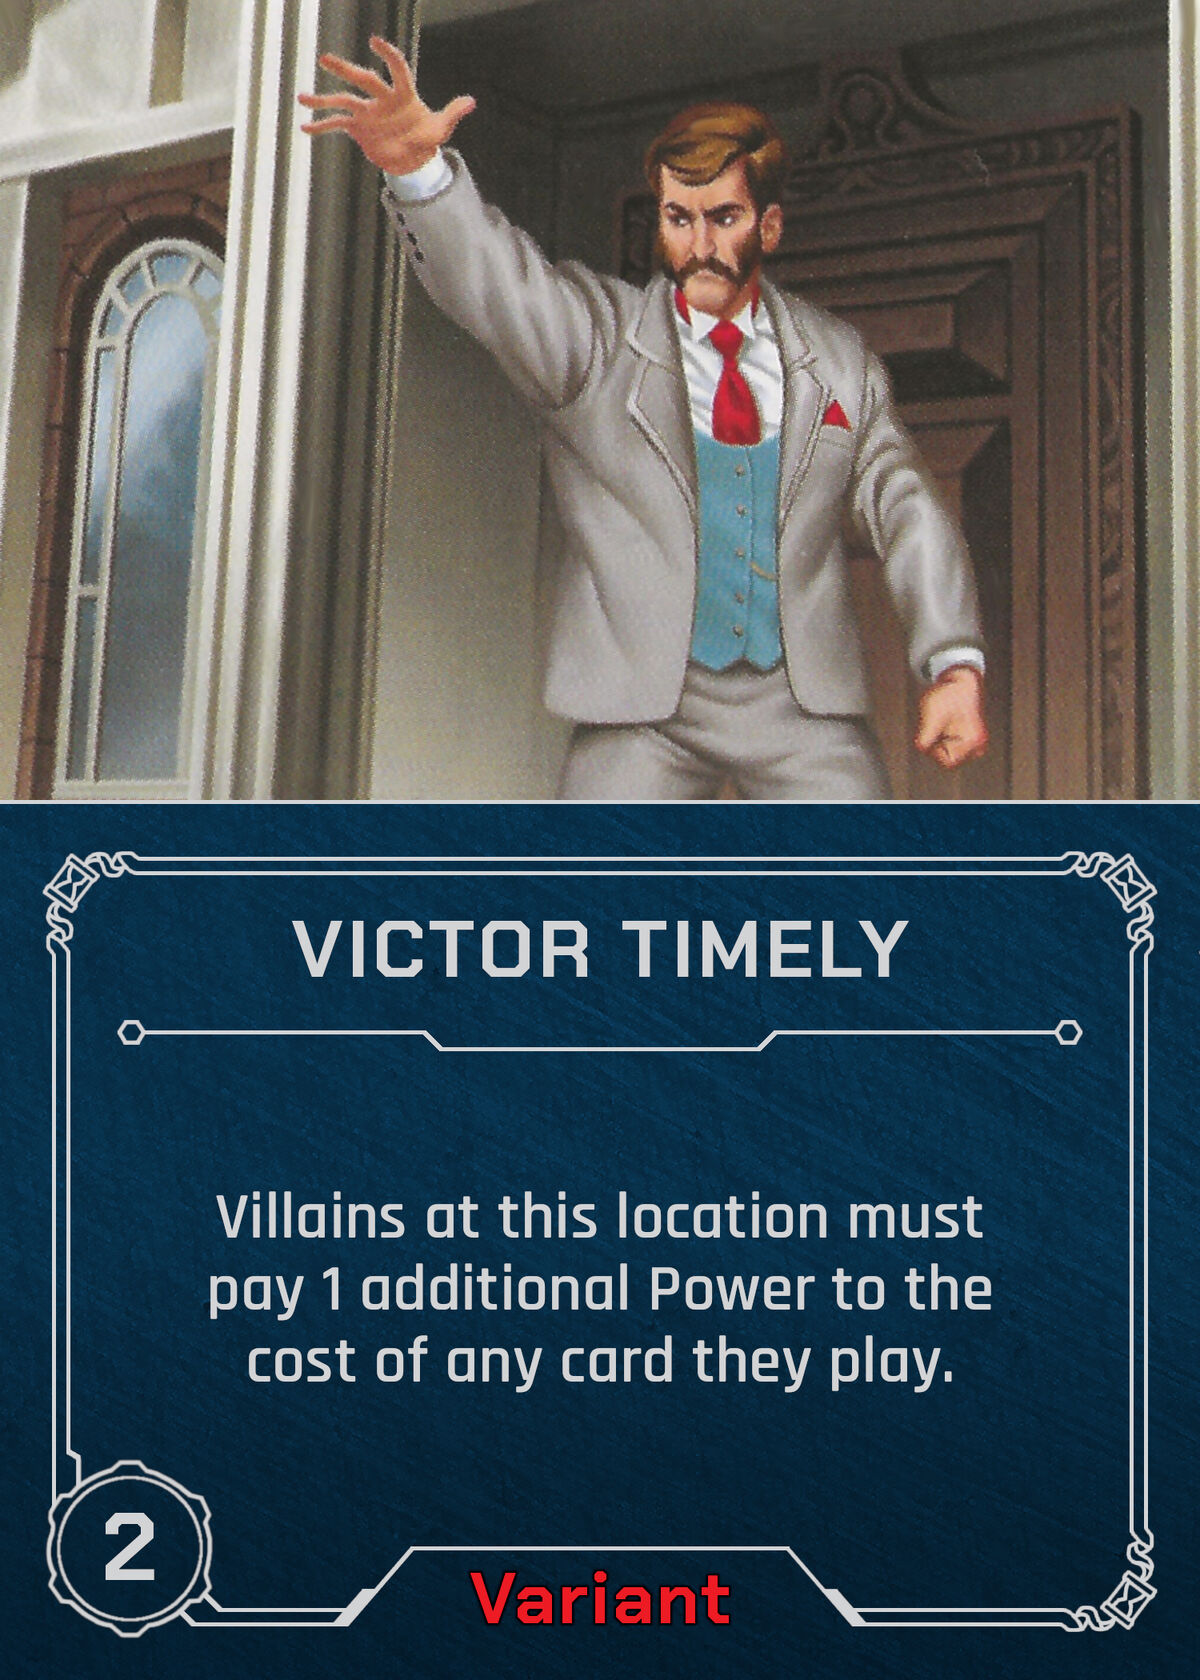 Victor Timely - Wikipedia